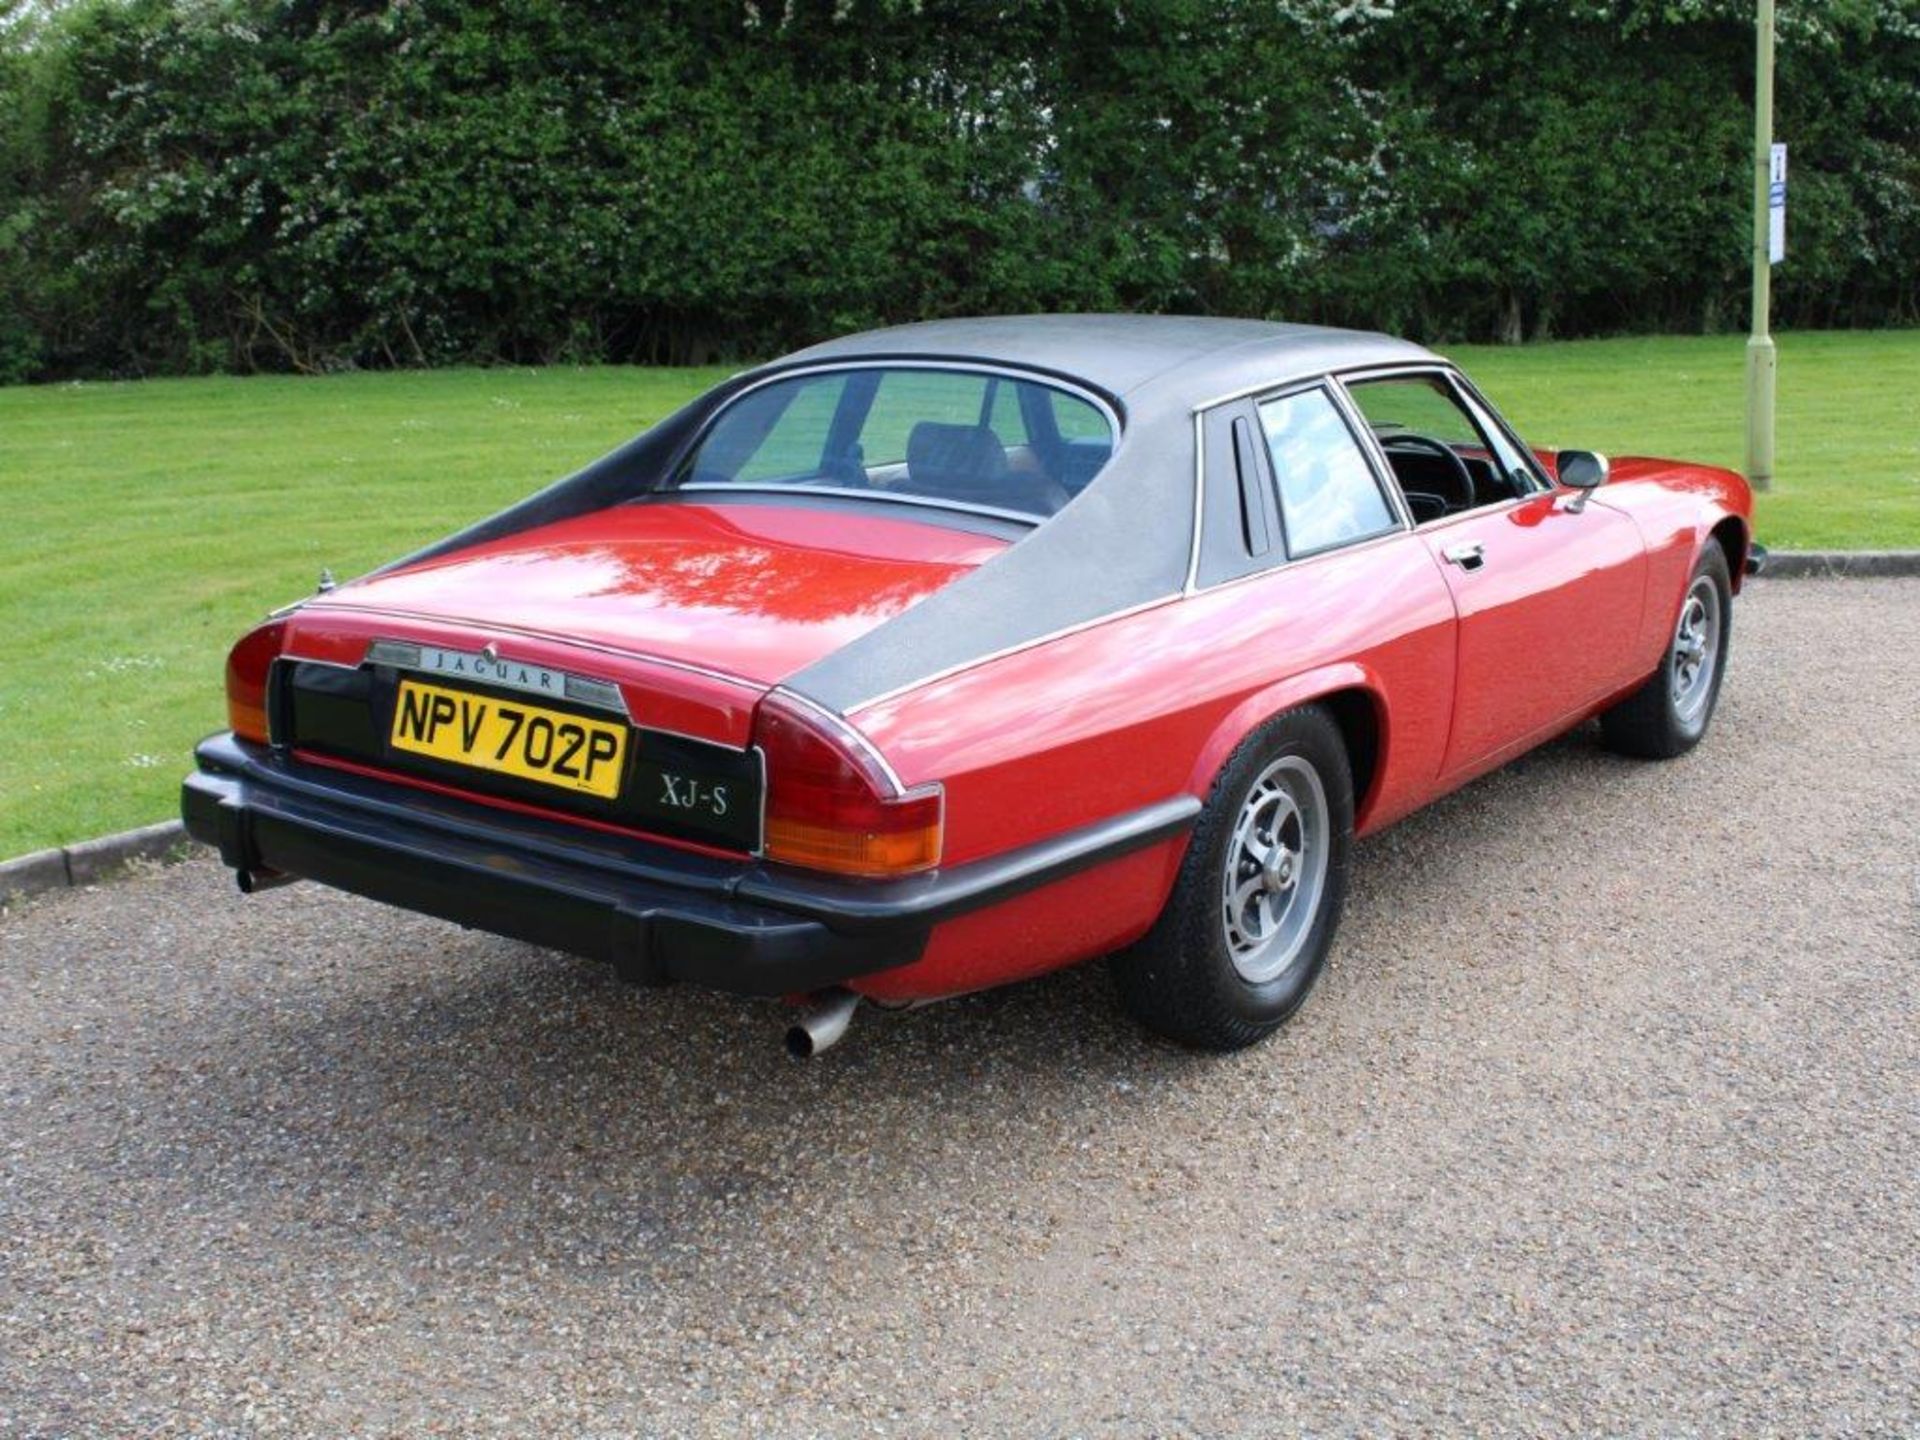 1976 Jaguar XJ-S 5.3 V12 Coupe Auto 29,030 miles from new - Image 2 of 28